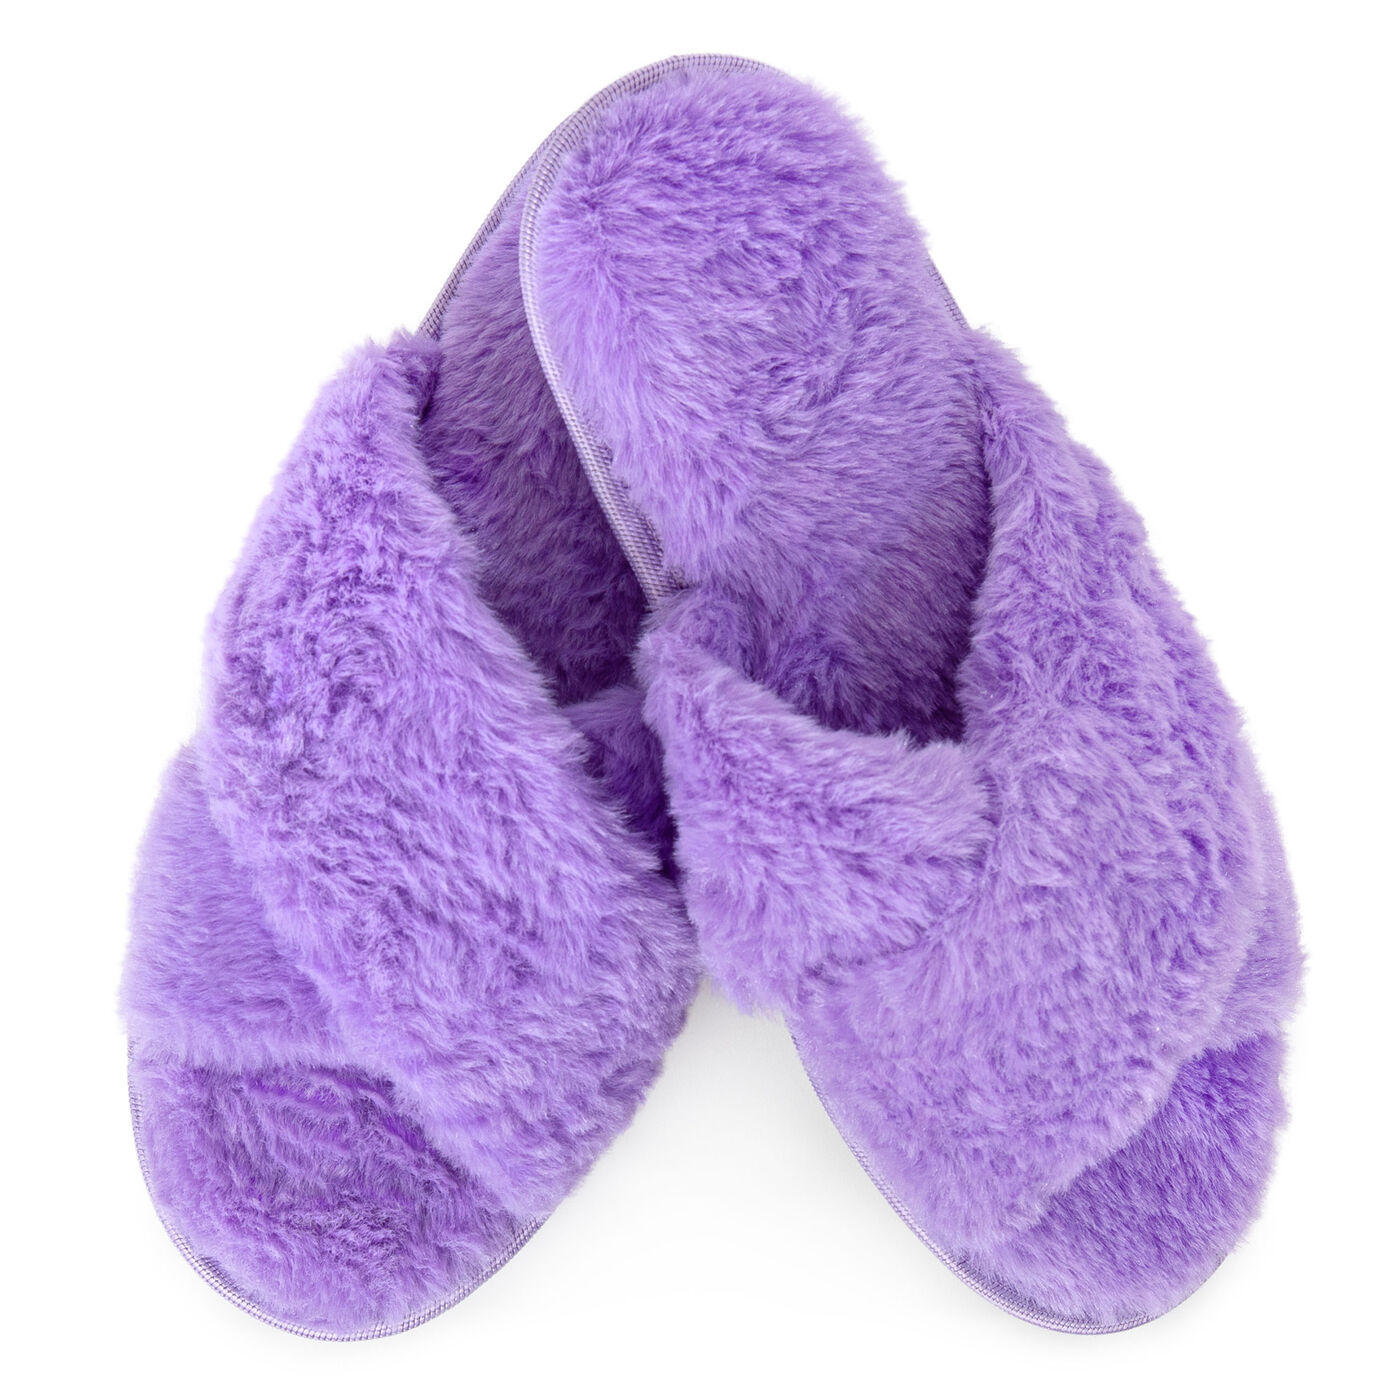 Buy Me to You Teddy Lavender Slippers & Wine Glass Gift for GBP 10.99 | Card Factory